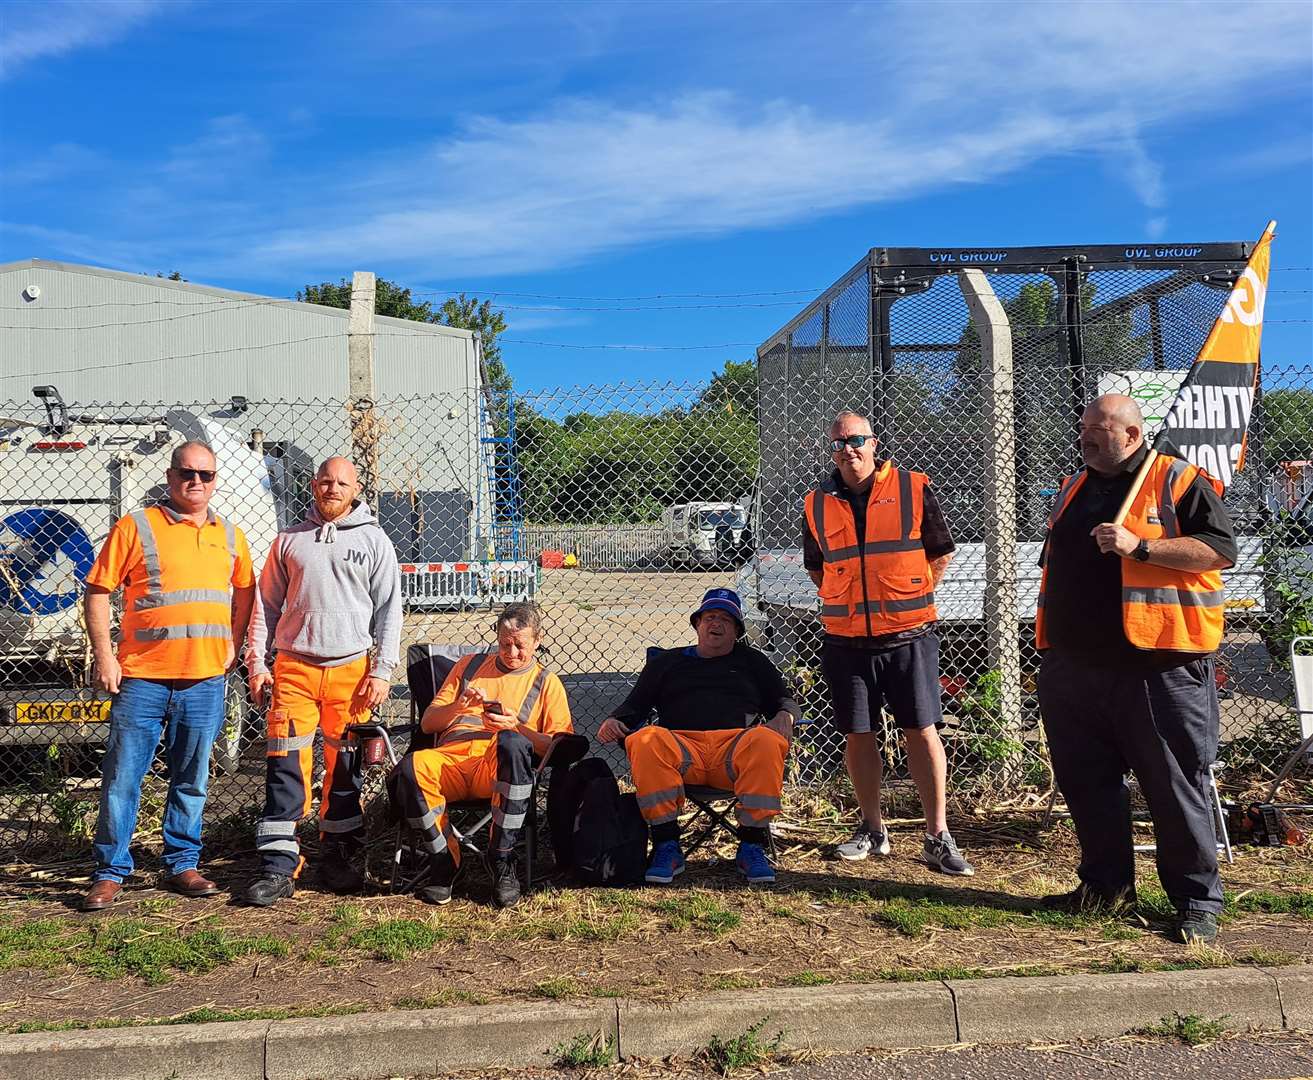 Canenco workers on the picket line in Wincheap, Canterbury